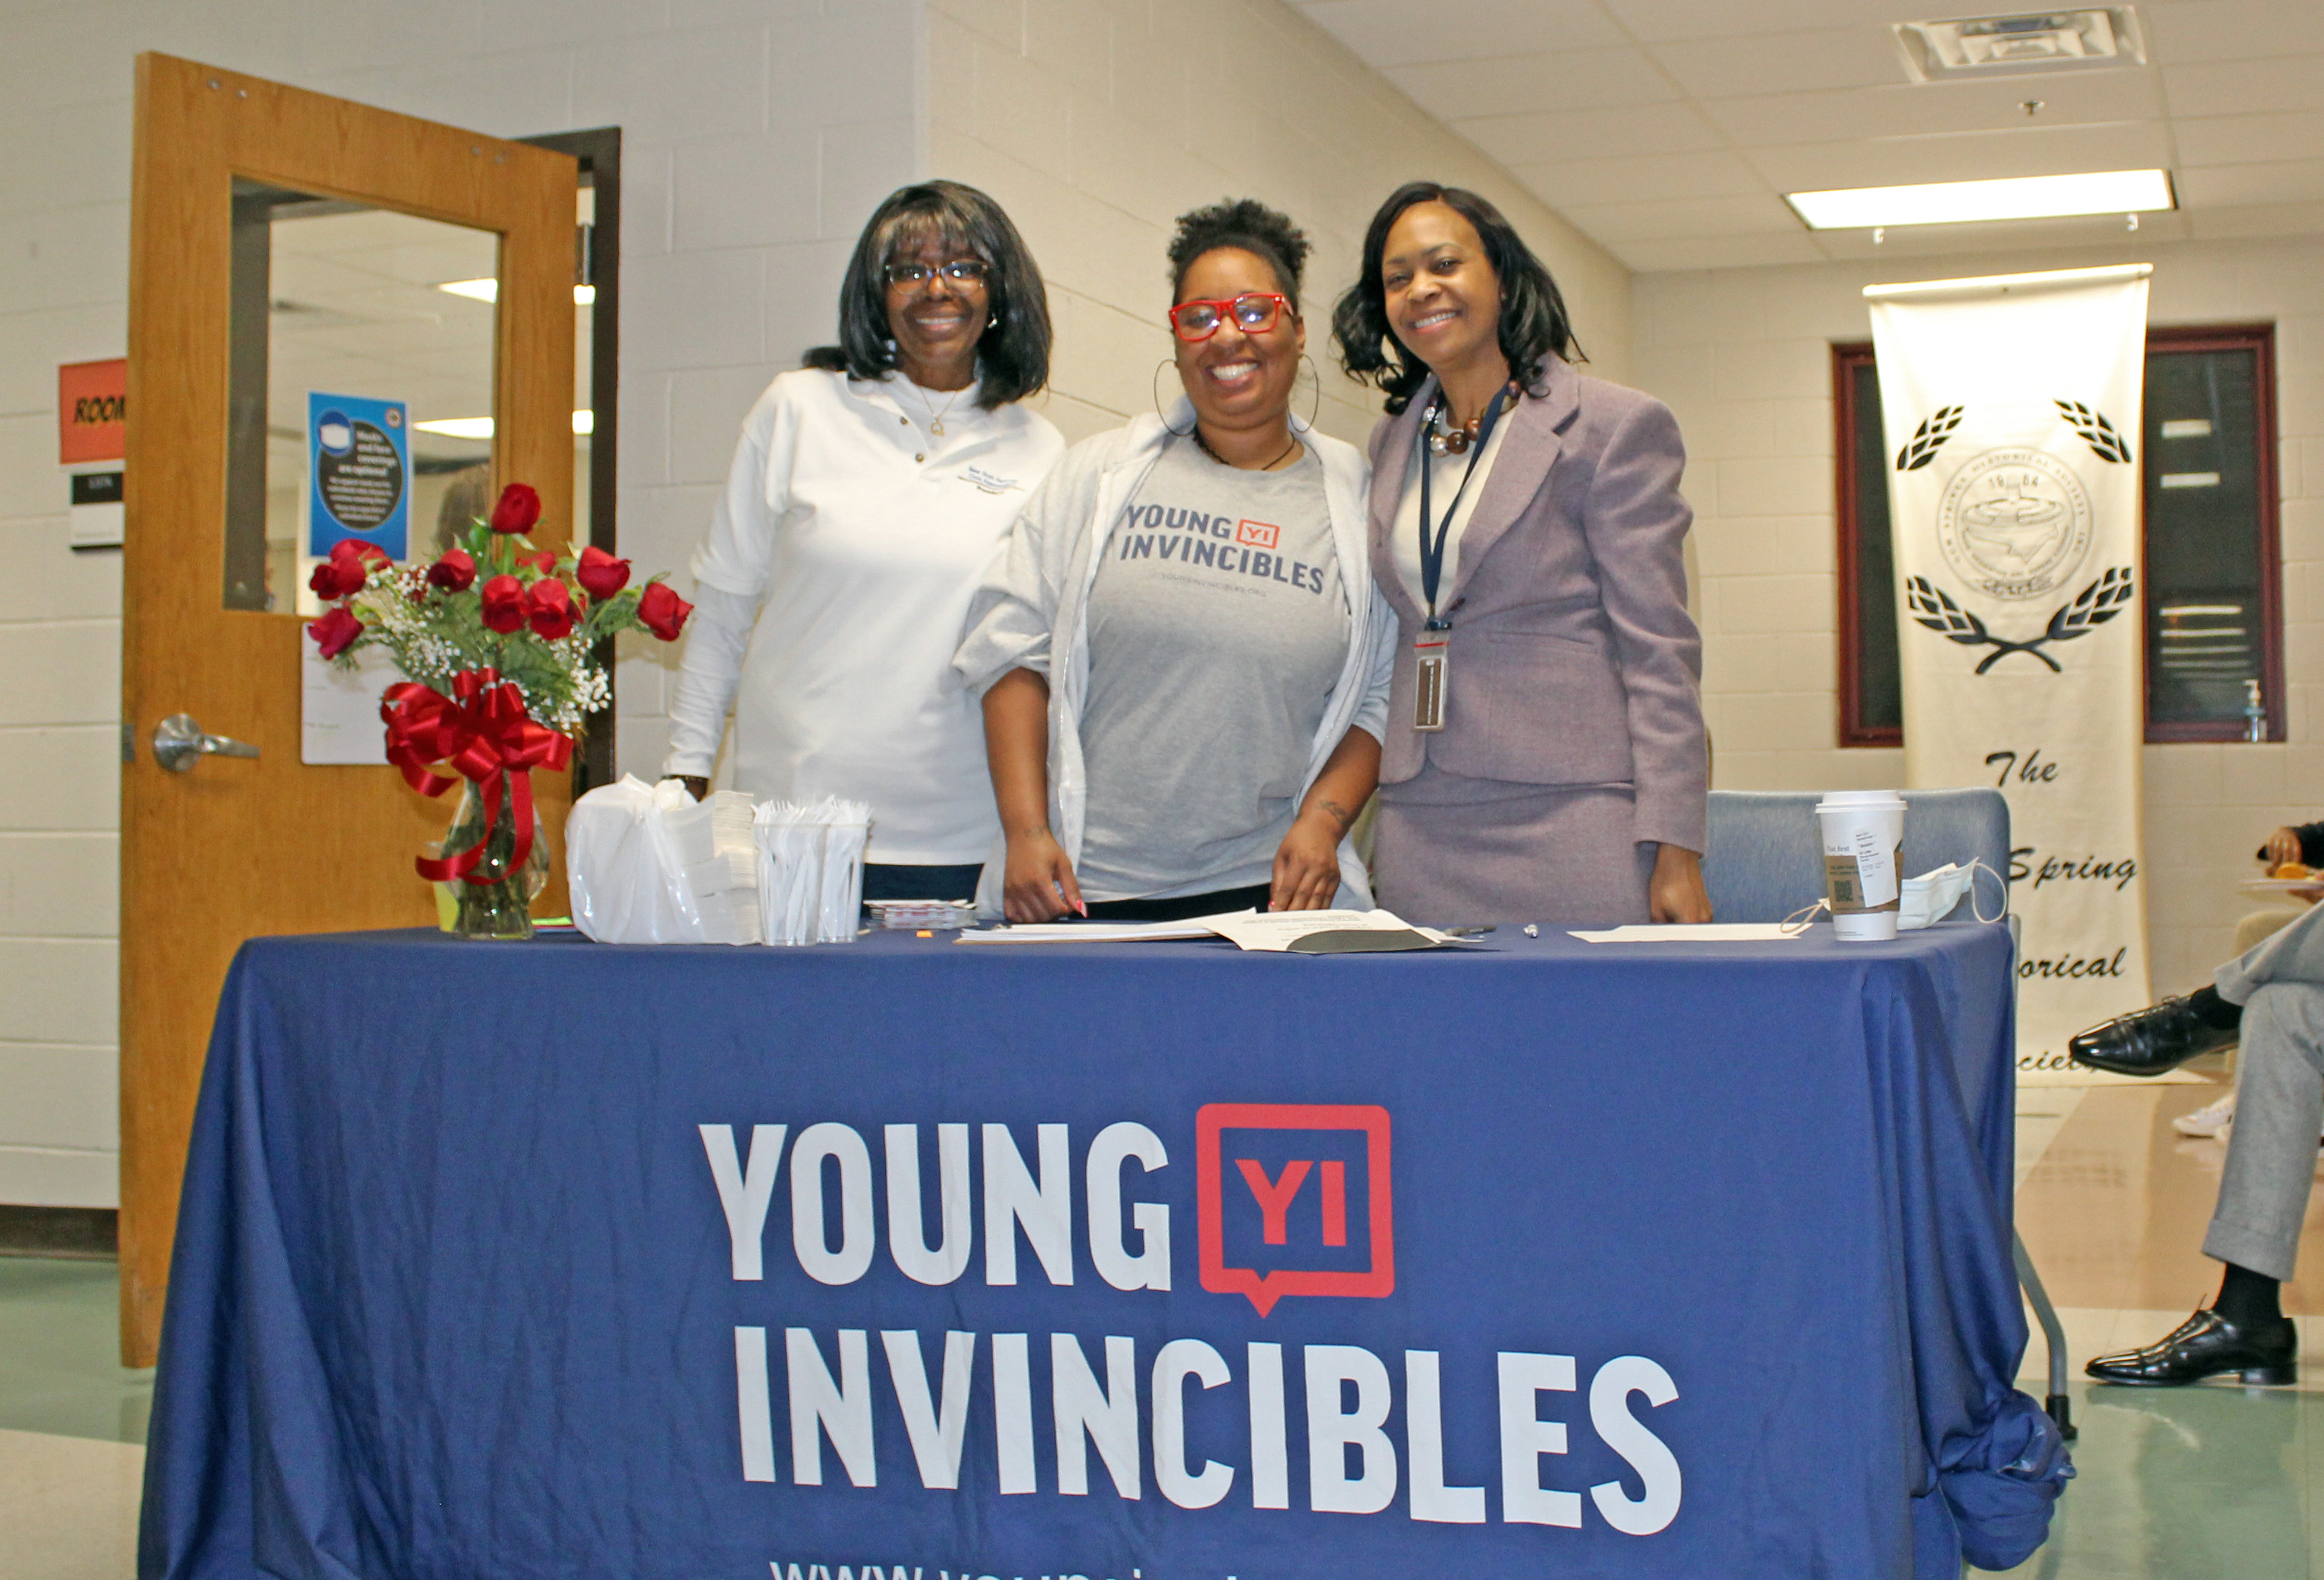 Fairfax County and Young Invincibles team members support the event